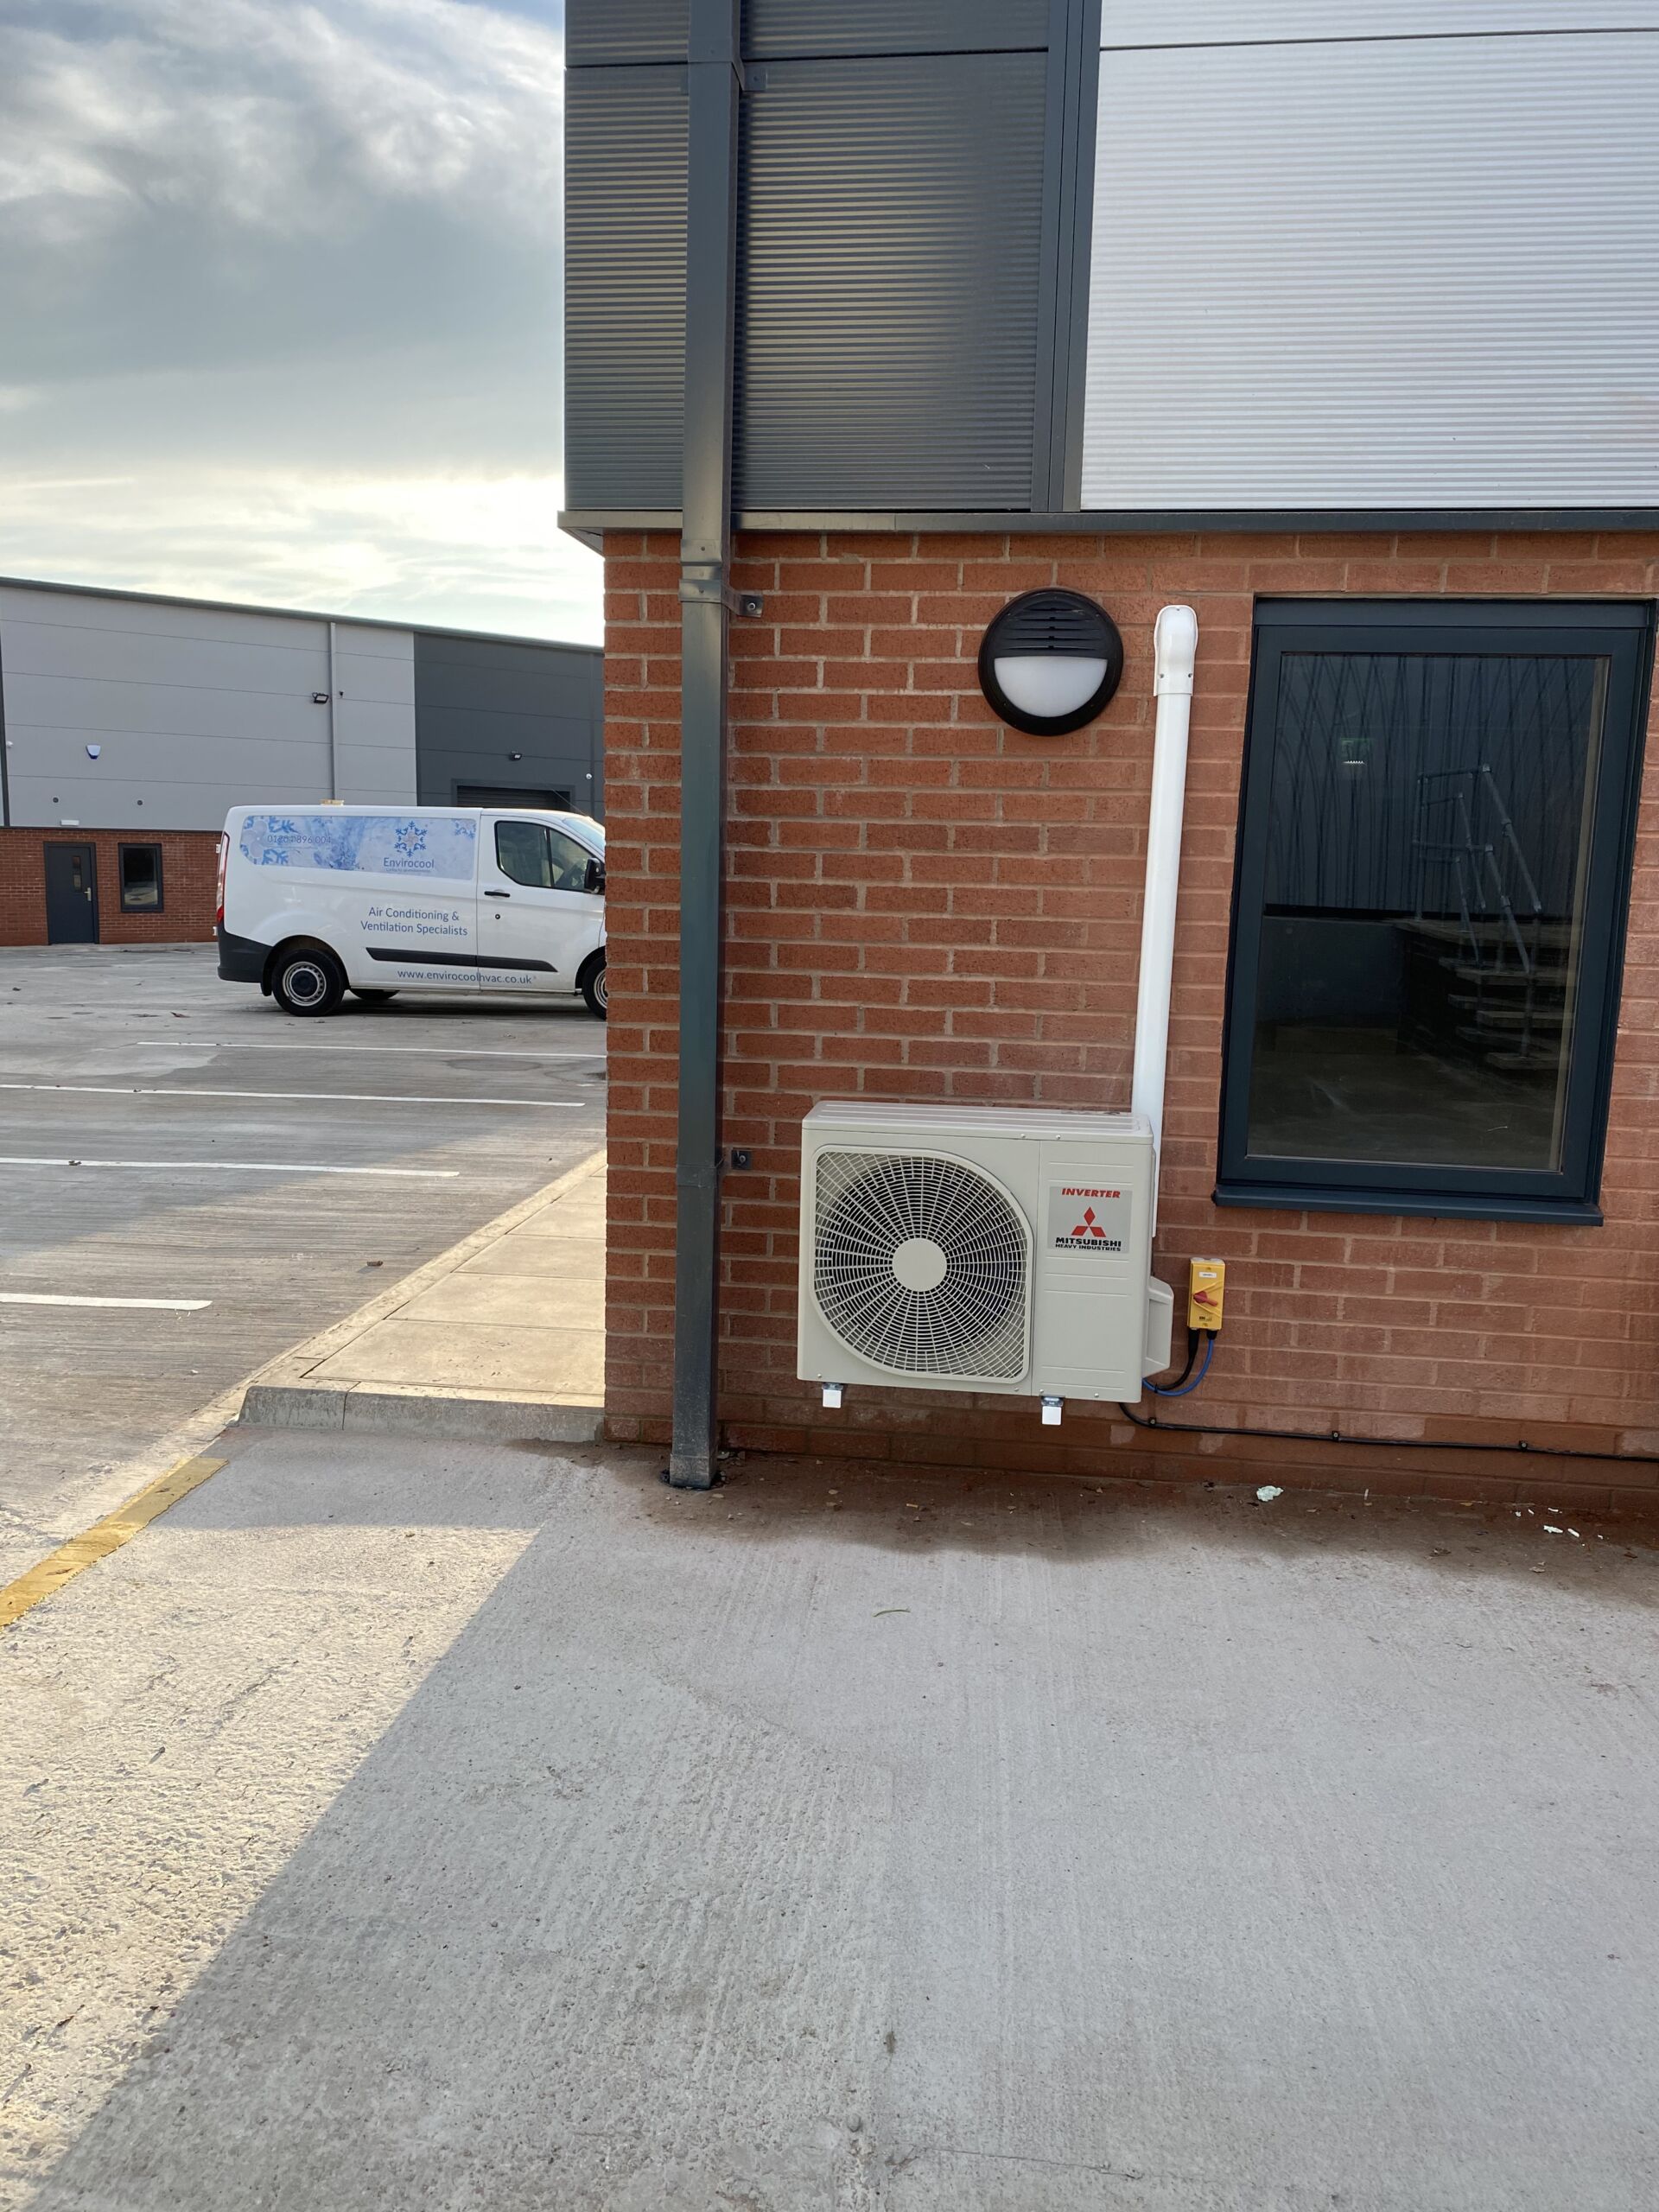 External air conditioning unit on a commercial building